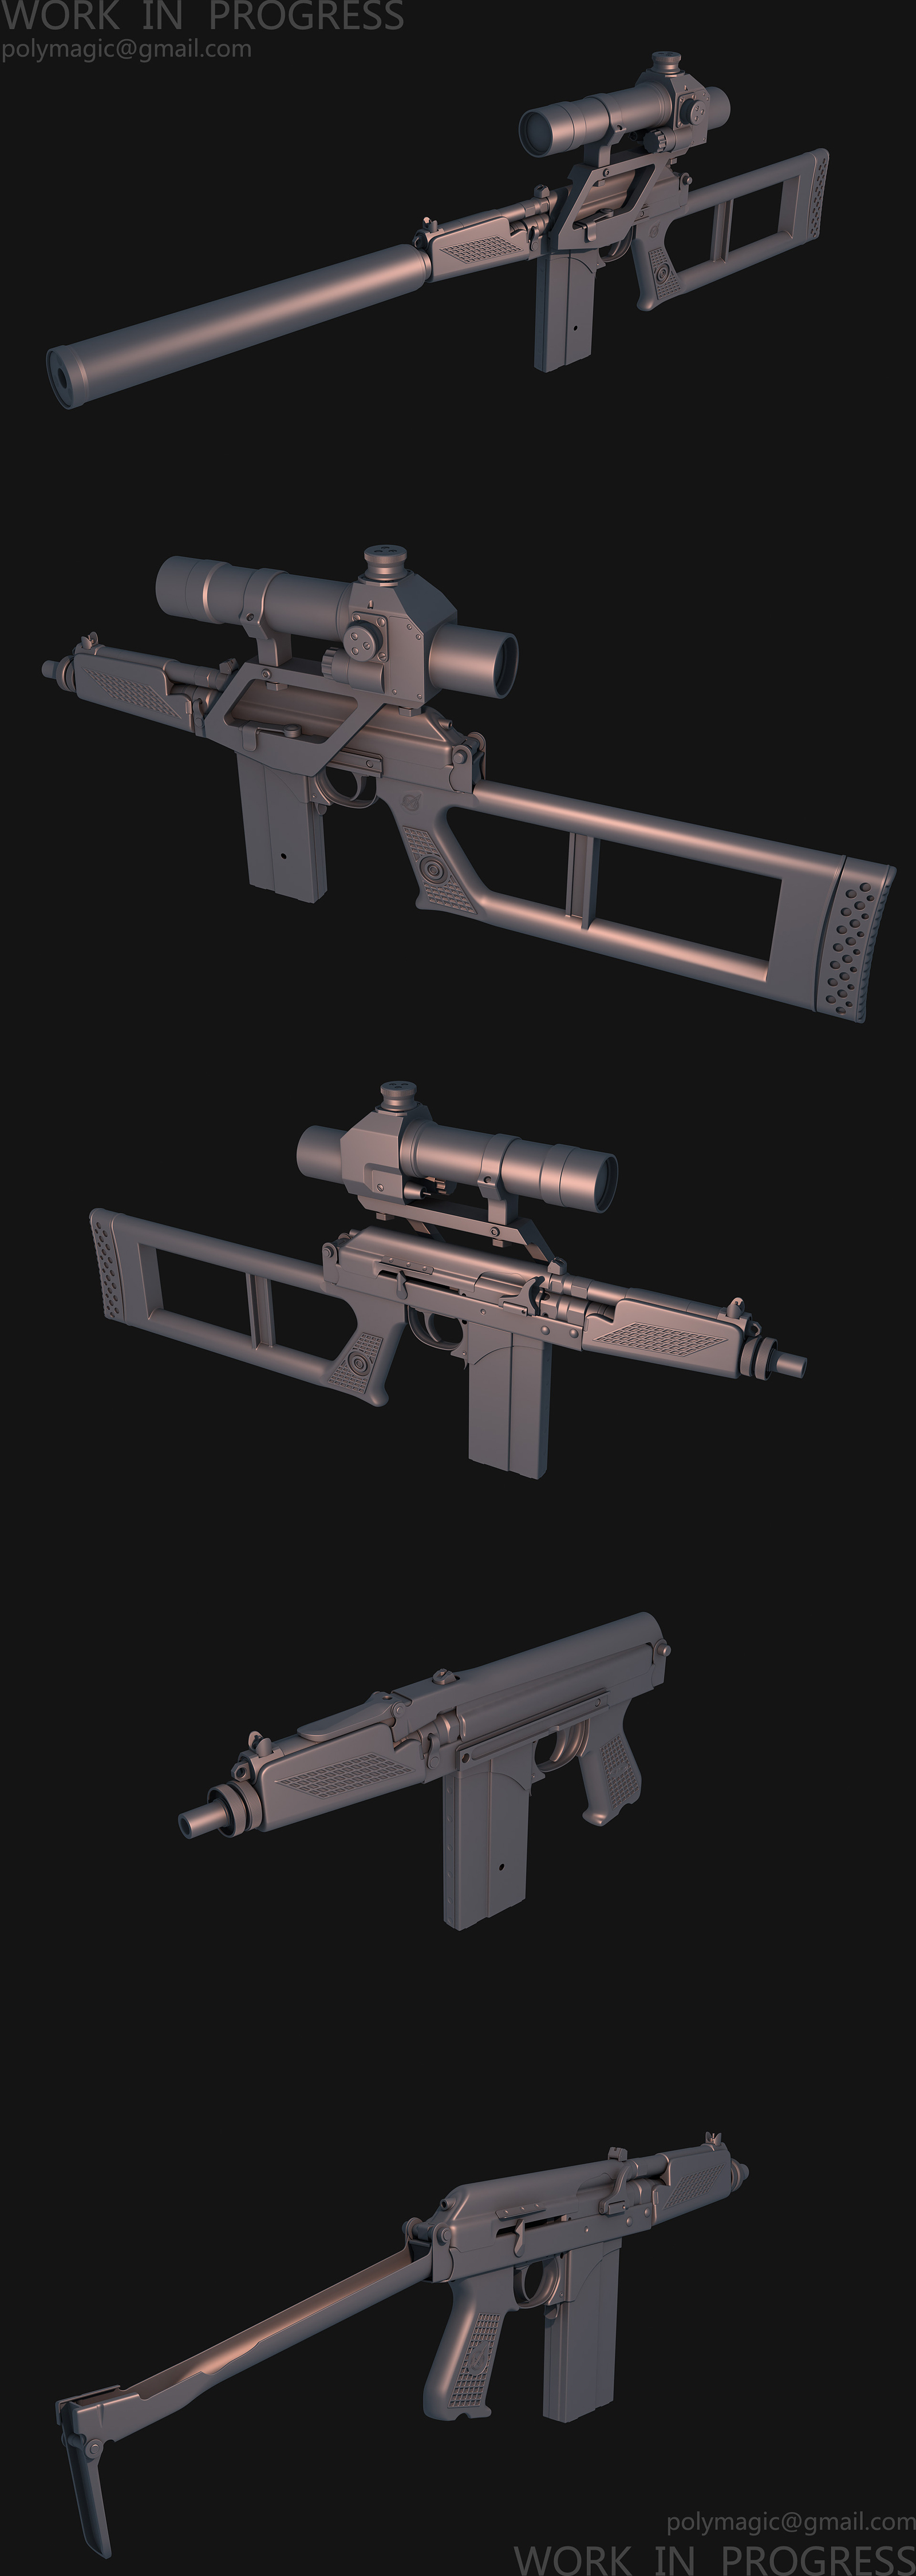 vsk_94___9a_91_high_res_modeling_in_progress_by_limiao-d4xbgyy.jpg